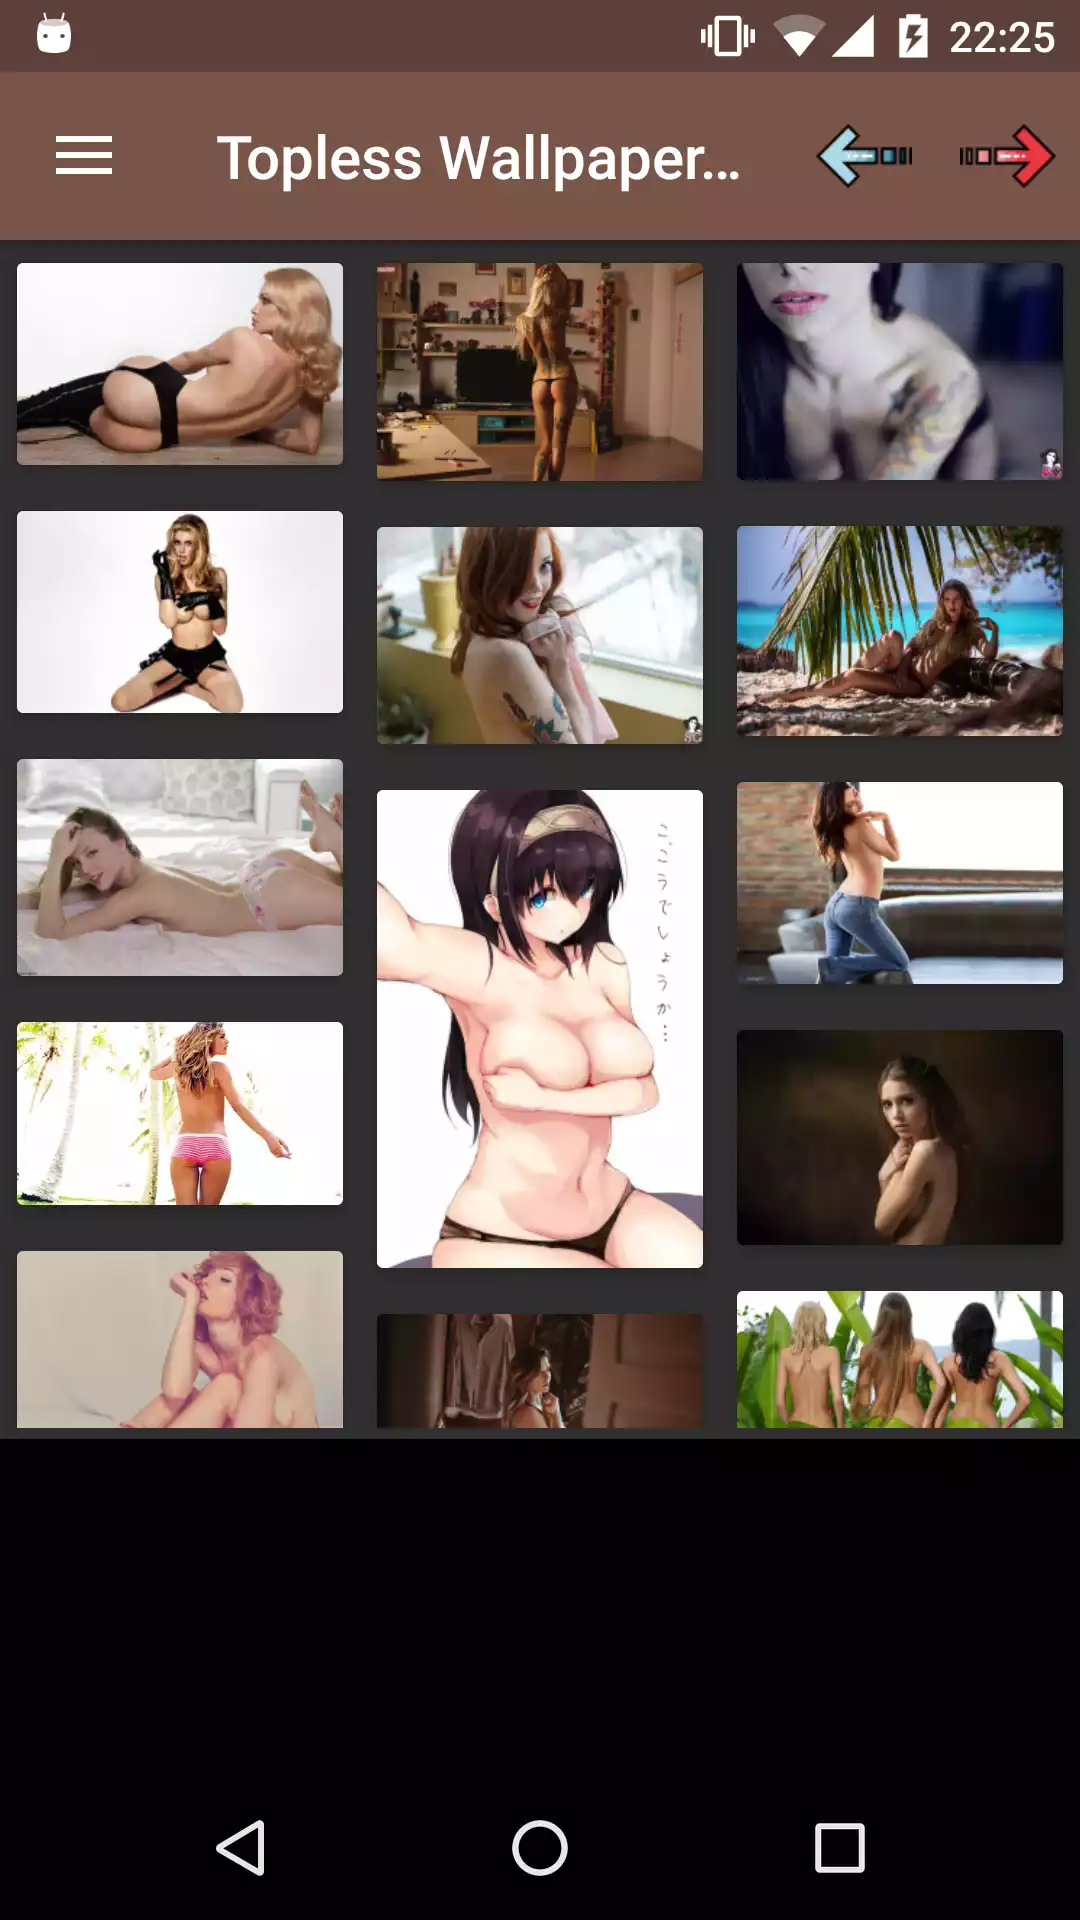 Topless backgrounds pornstar,apps,porn,wallpapers,pics,backgrounds,android,applications,teen,app,sex,pornstars,hentai,gallery,anime,sexy,anoko,photo,nhentai,hentia,hot,erotic,for,sissy,pic,mainichi,free